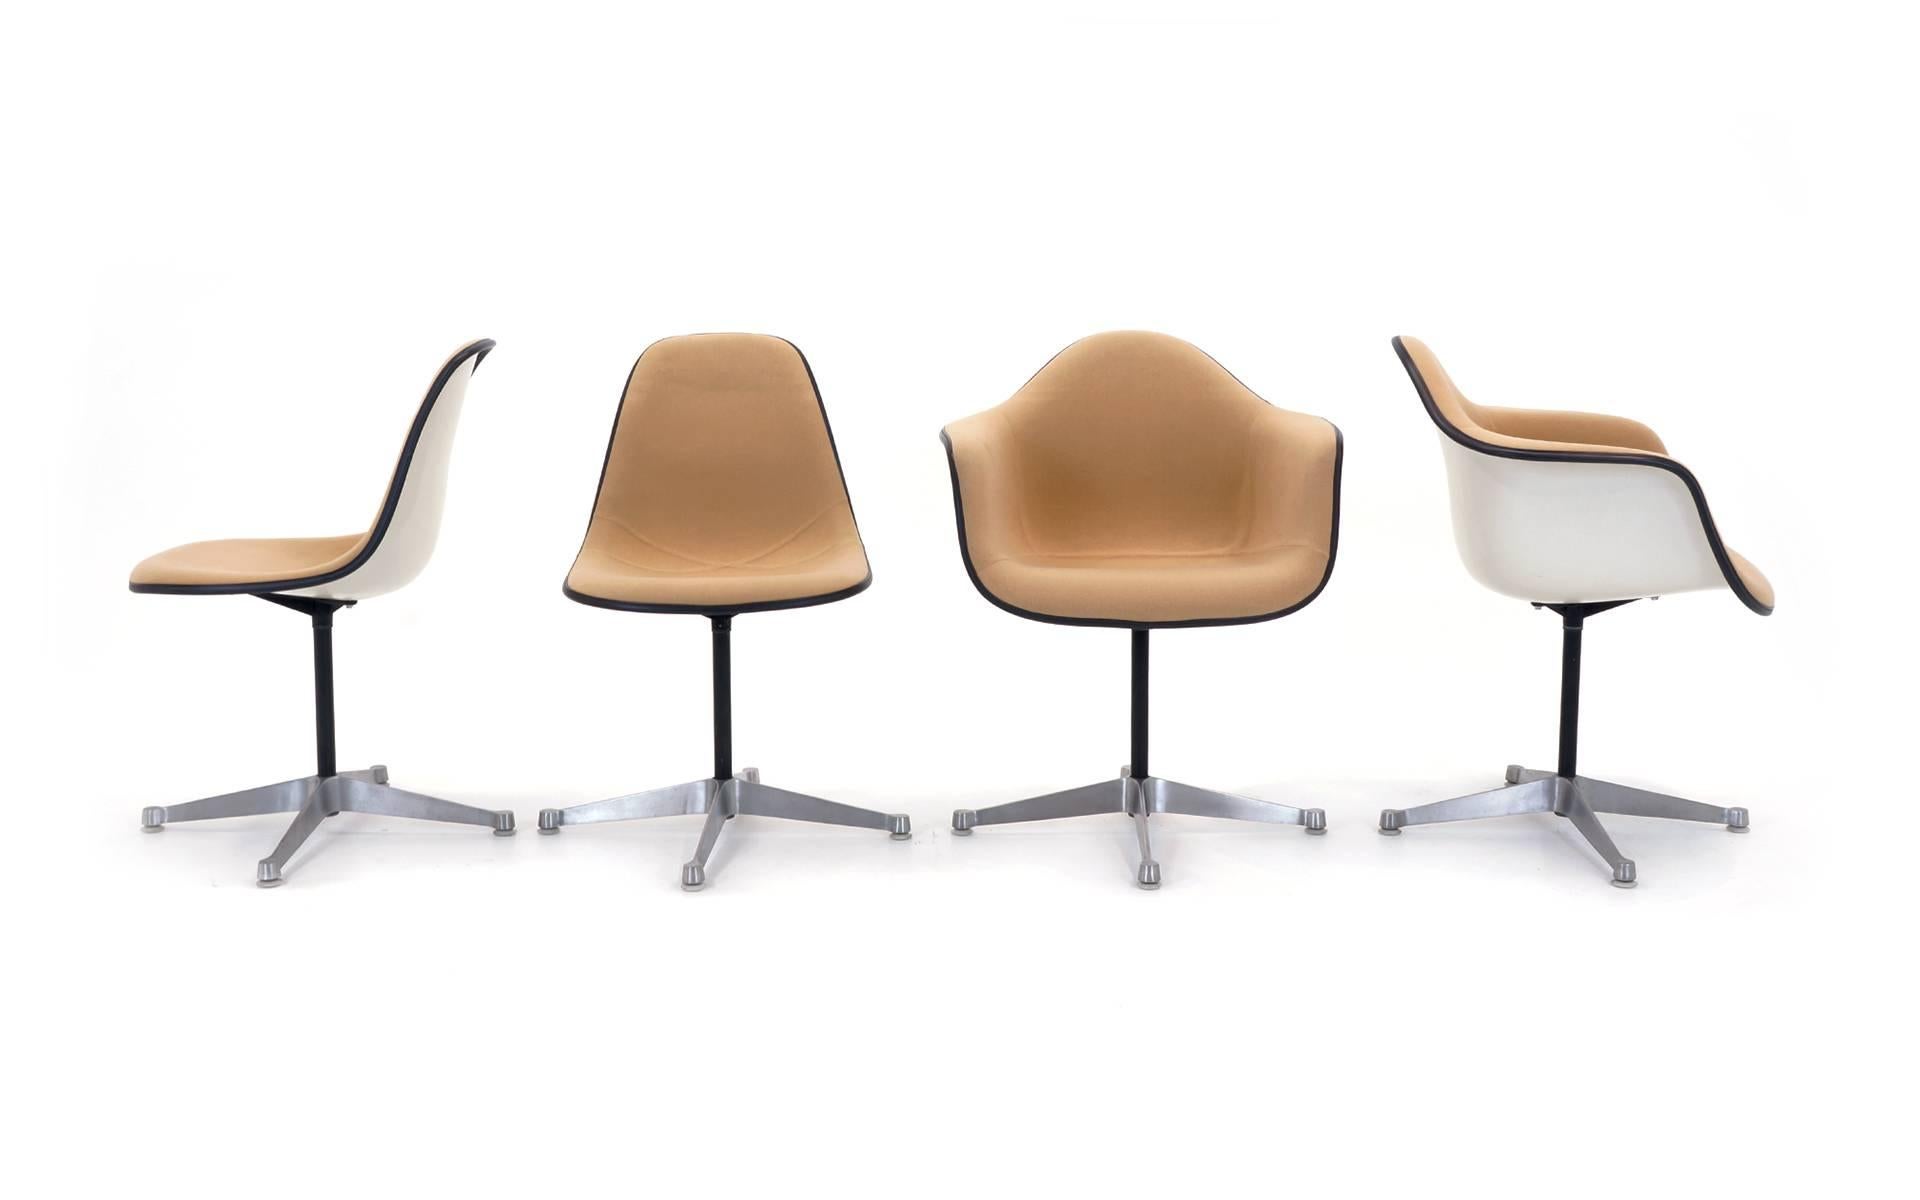 Set of eight Charles and Ray Eames fiberglass swivel chairs with cream colored upholstery. Two armchairs and six armless chairs all with the rare and desirable swiveling contract base.